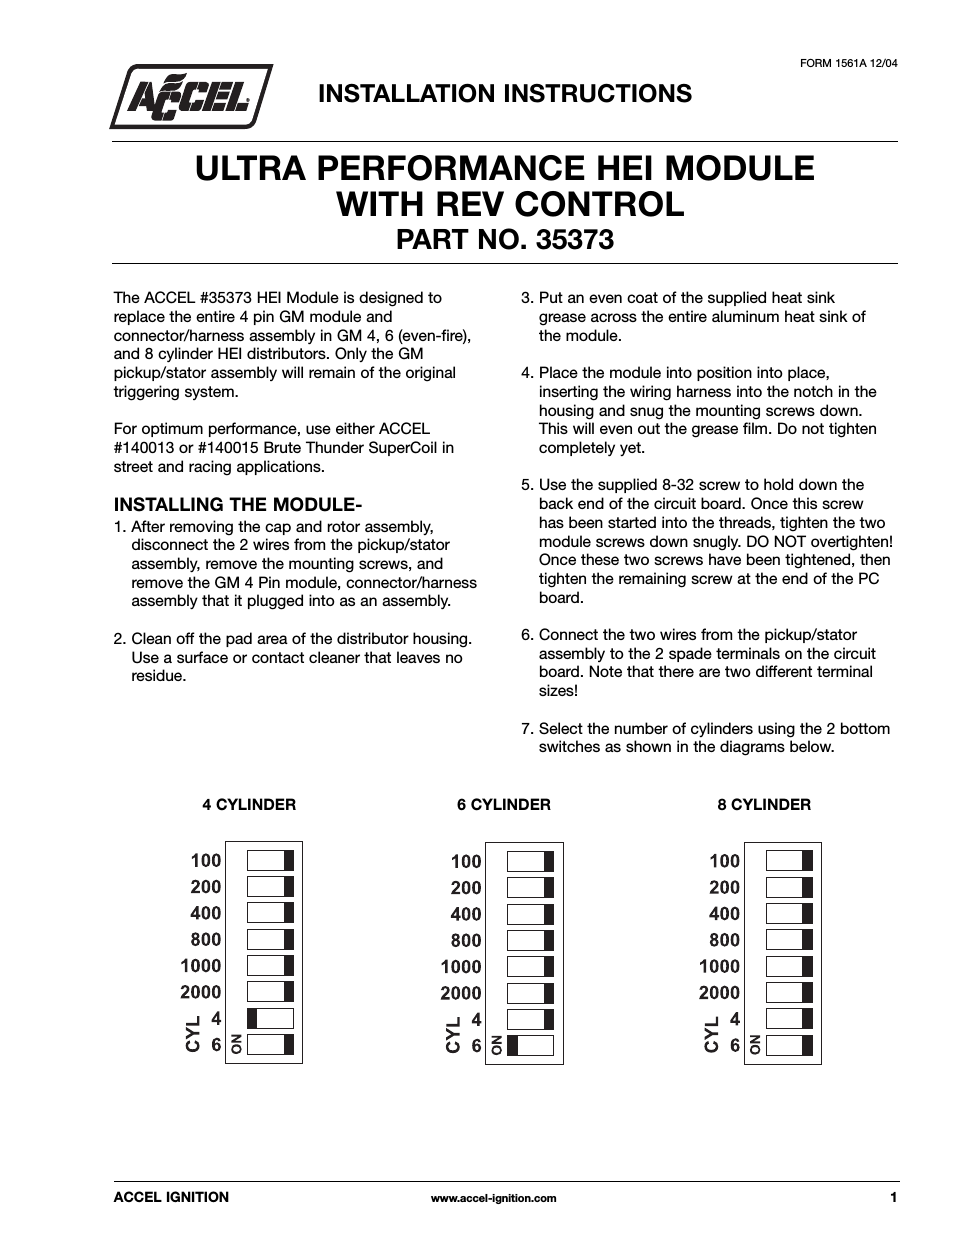 ACCEL ULTRA PERFORMANCE HEI MODULE WITH REV CONTROL 35373